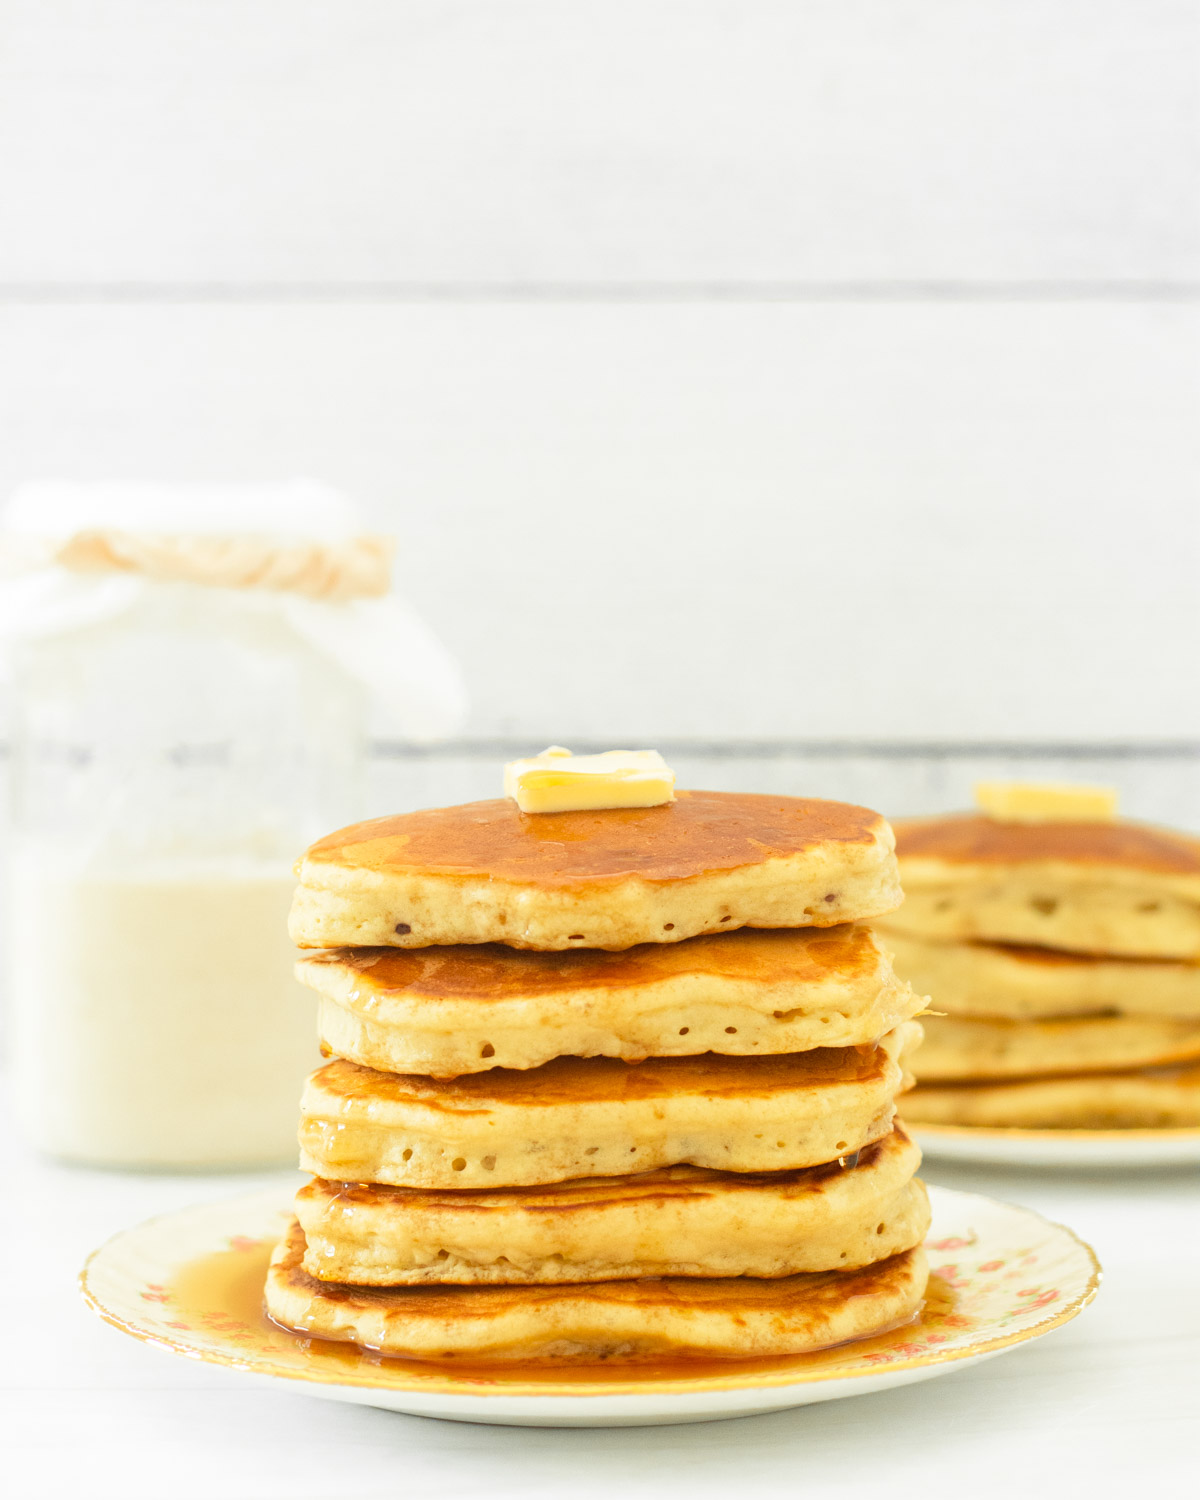 These sourdough pancakes are an easy sourdough recipe made with simple ingredients and sourdough discard to make the fluffiest sourdough pancakes. This is a quick breakfast recipe perfect for both a weekday and weekend breakfast.